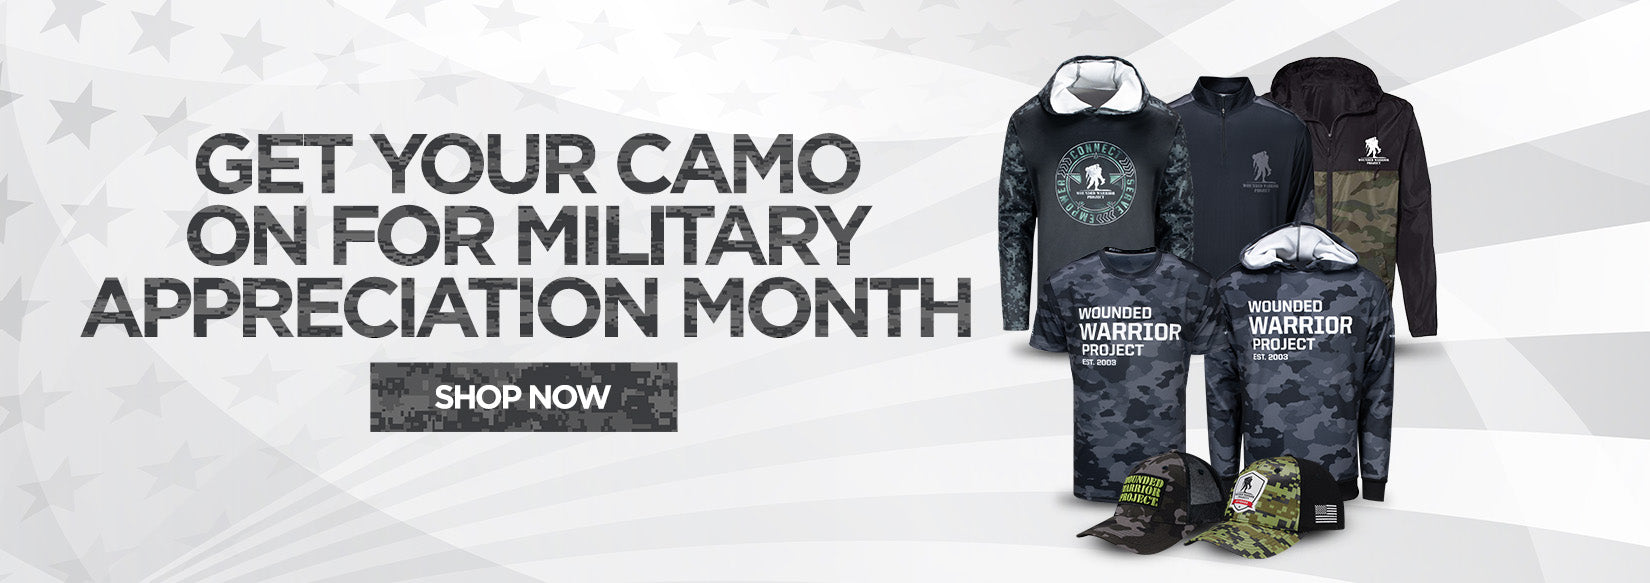 Get Your Camo on For Military Appreciation Month - SHOP NOW